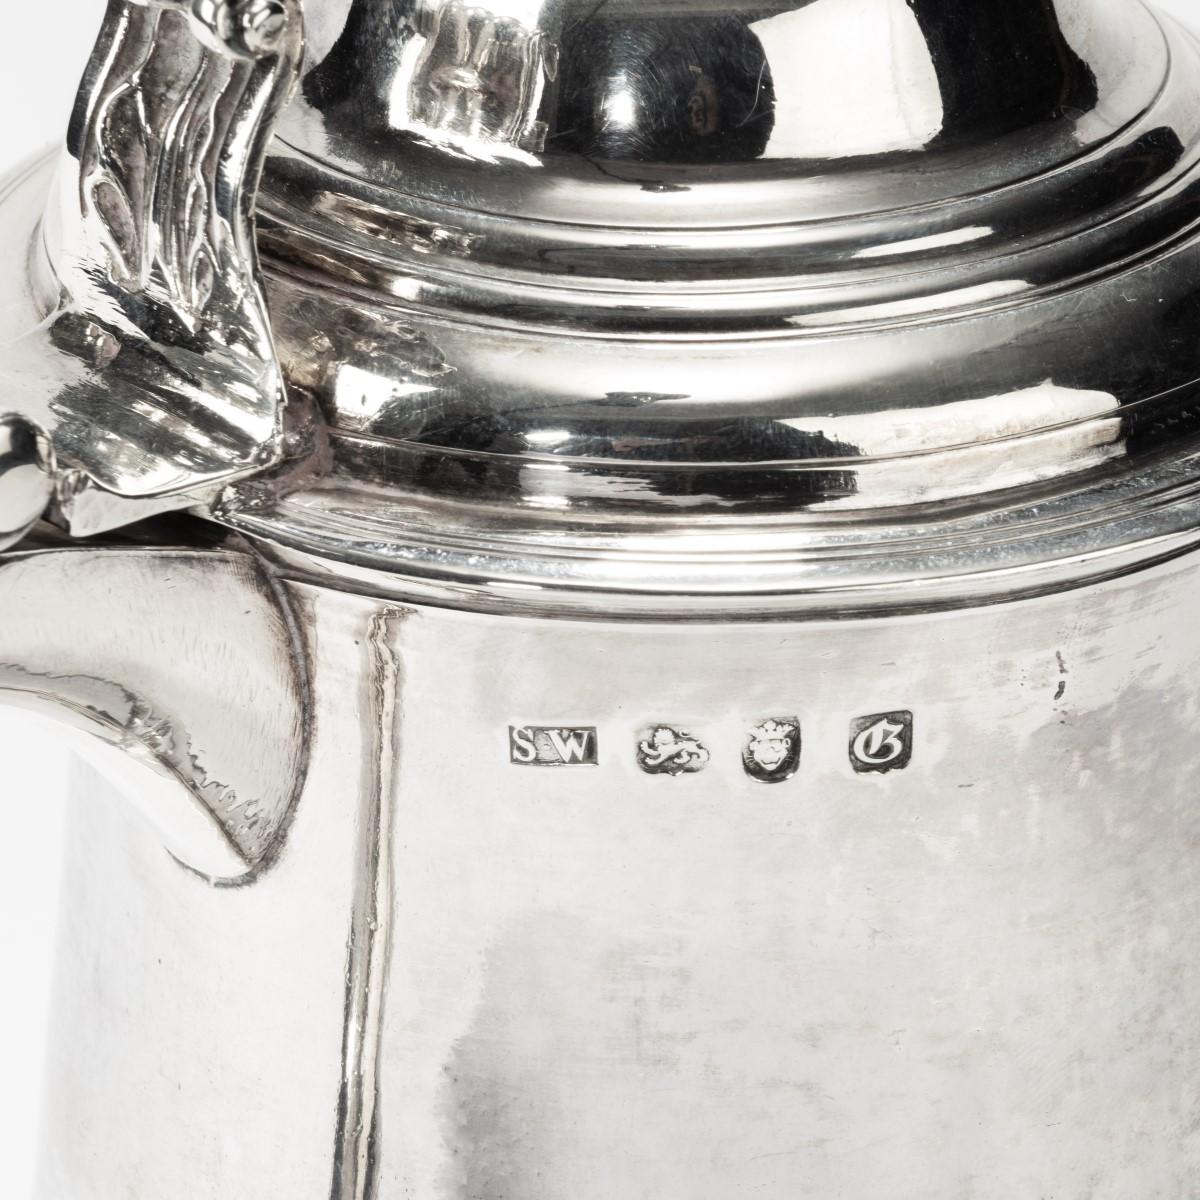 An early George III silver tankard, the cylindrical body with an applied S-scroll handle with a foliate thumb piece attached to a high, domed cover, clear assay stamps for SW, London, 1762-1763.